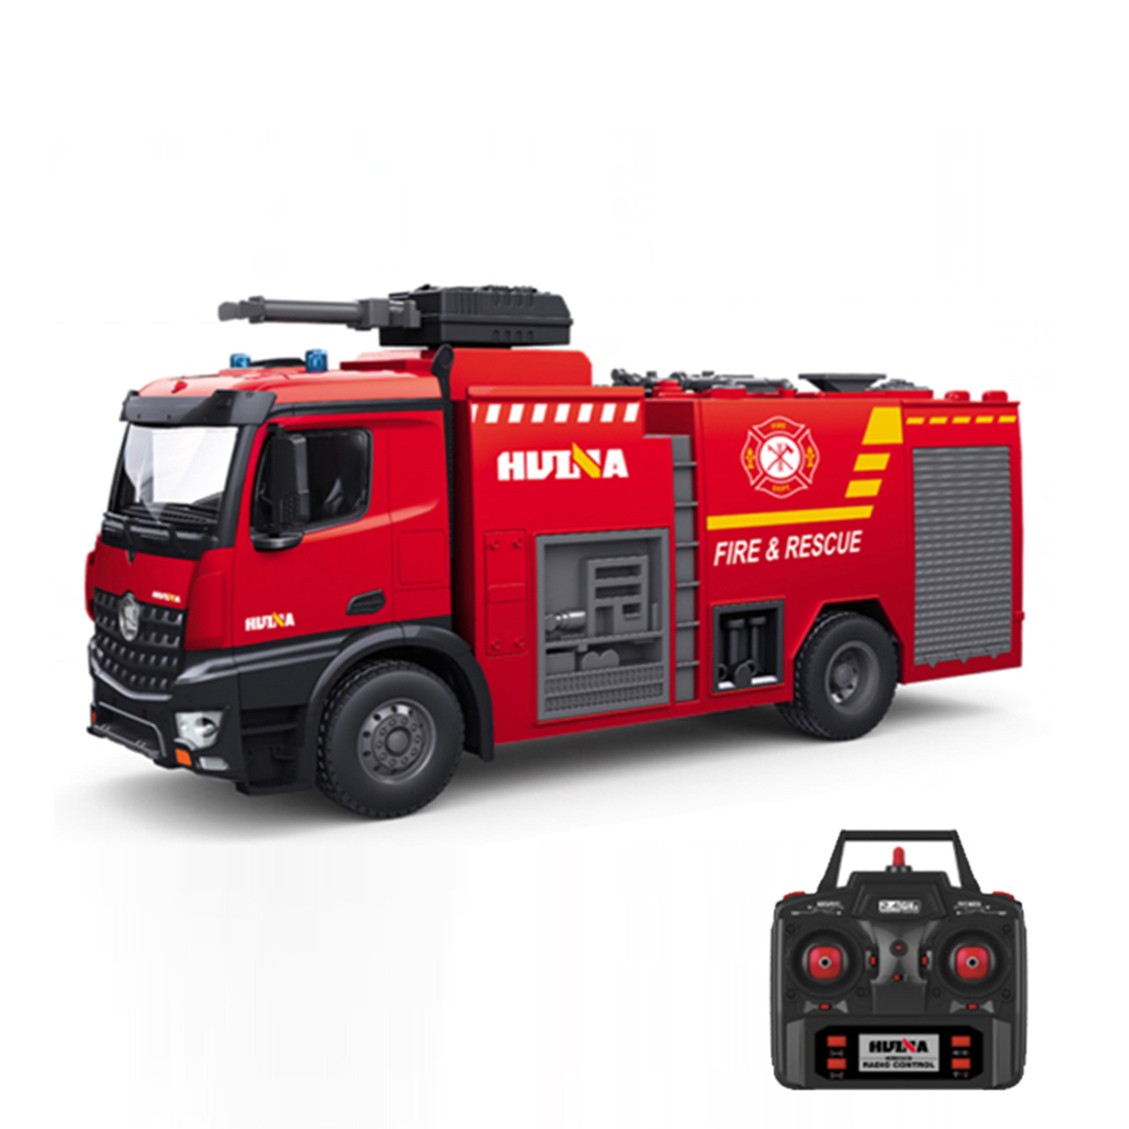 HUINA 1562 rc sprinkler water spray remote control fire fighting truck fire engine toy vehicles